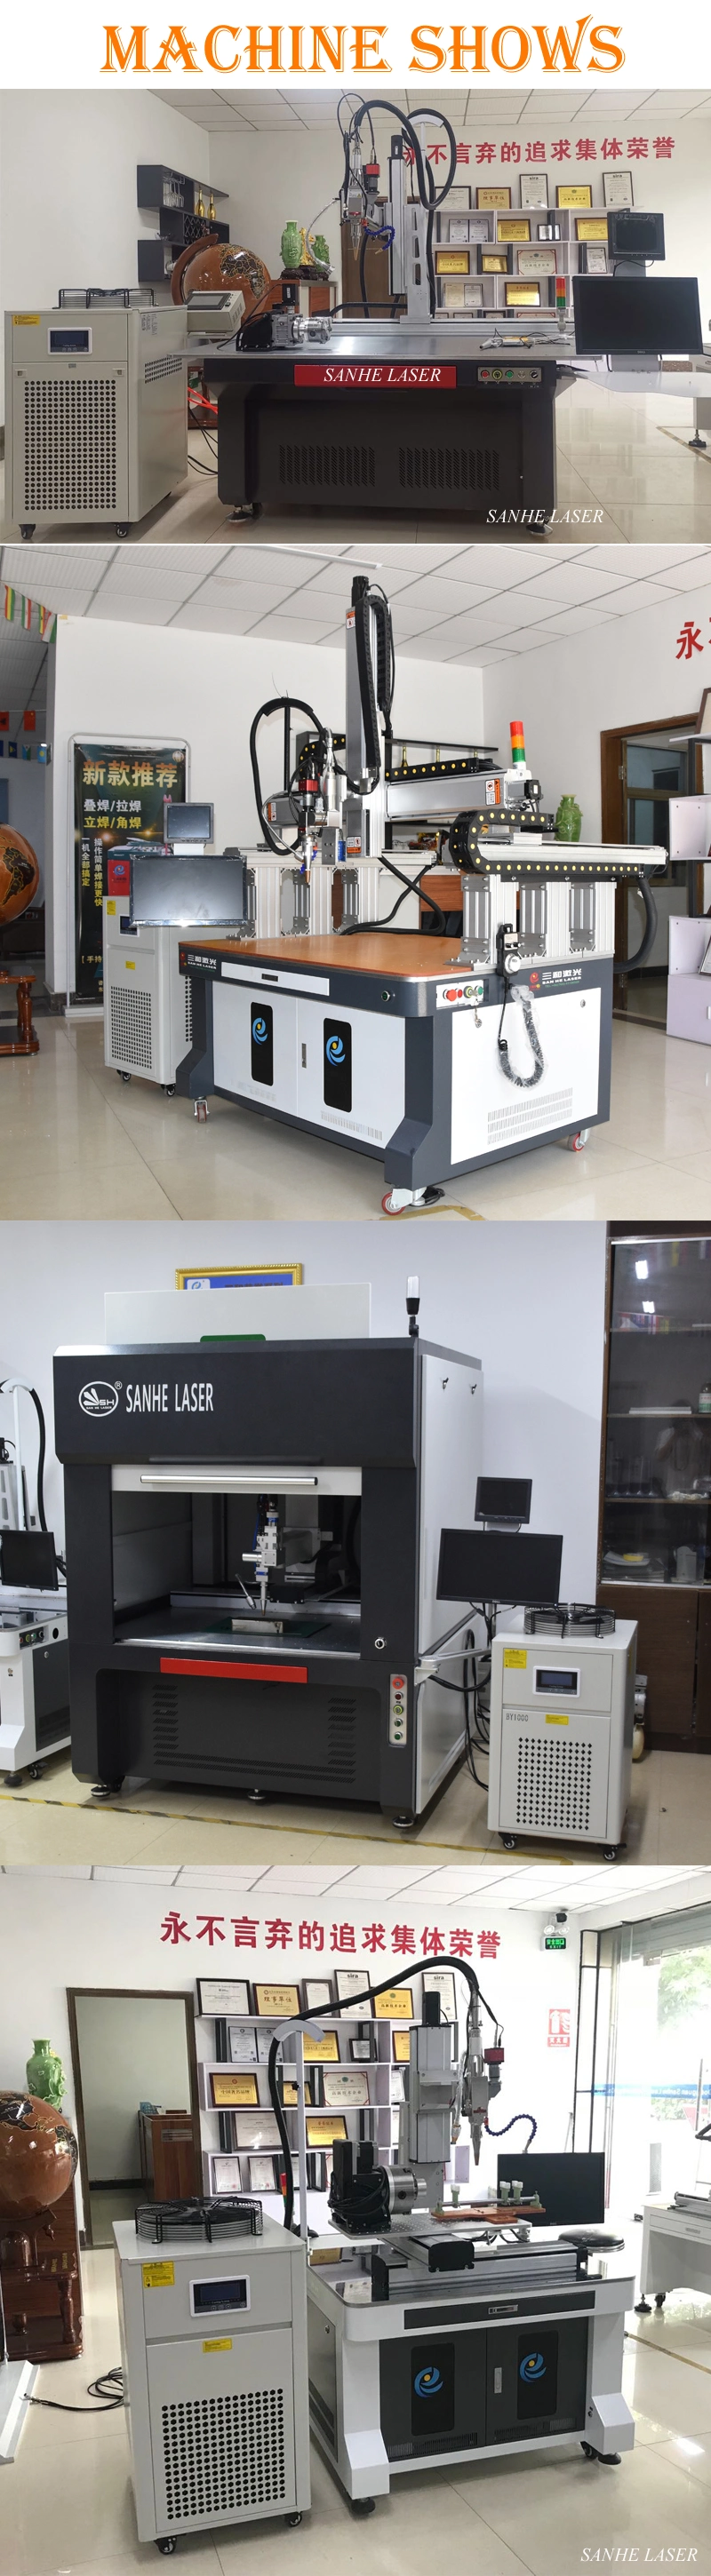 OEM/ODM Factory Price 1000W 2000W 6 Axis Automatic Fiber Laser Welding Machine for Turkey Kettle Teapot